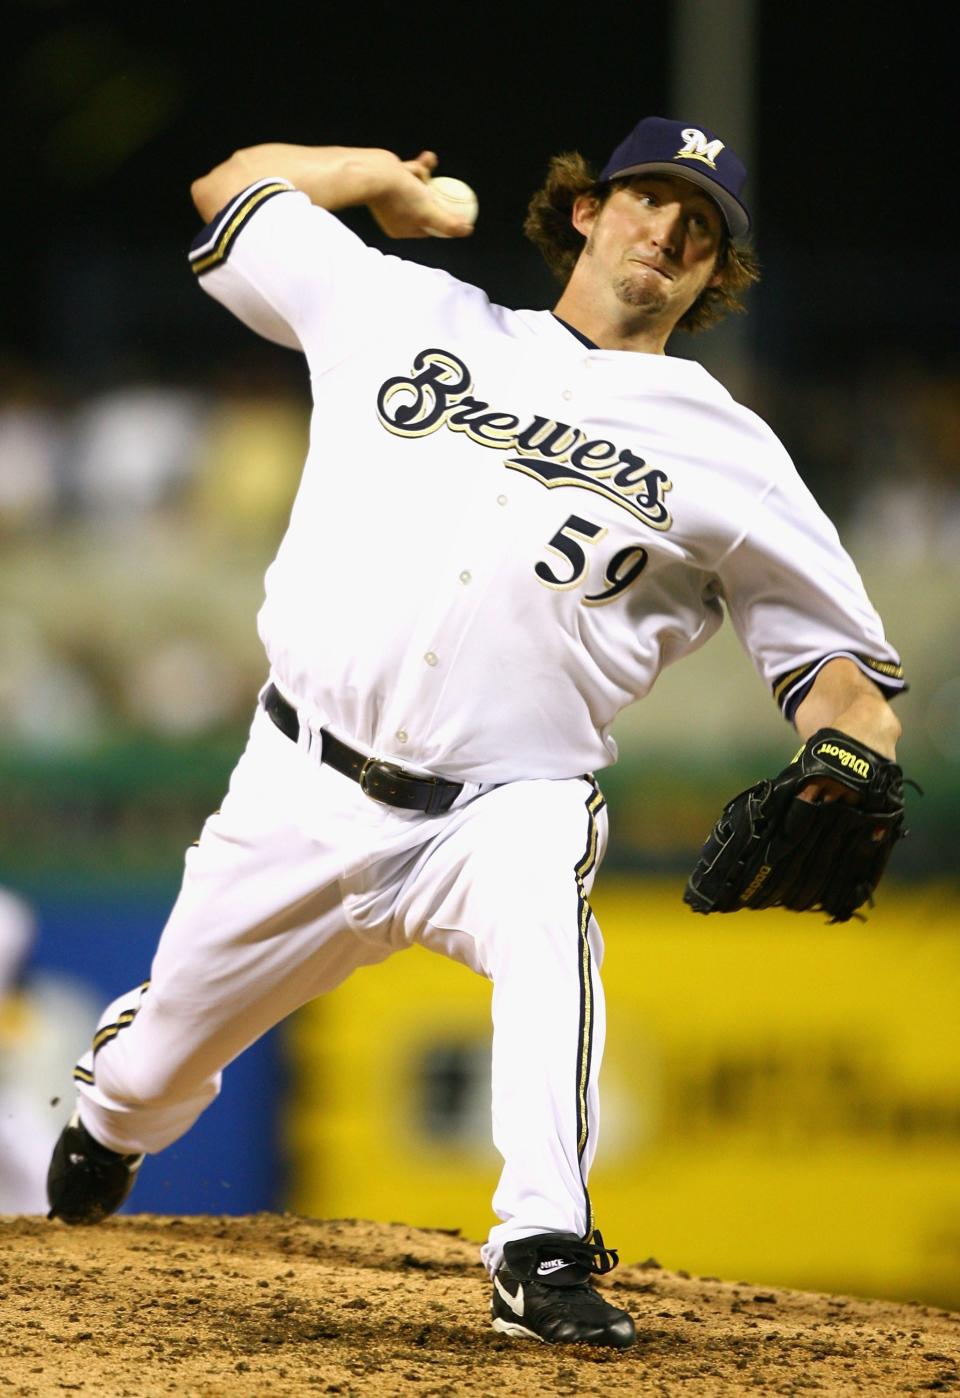 Derrick Turnbow of the Milwaukee Brewers pitches against the American League All-Stars during the 77th MLB All-Star Game at PNC Park on July 11, 2006 in Pittsburgh.